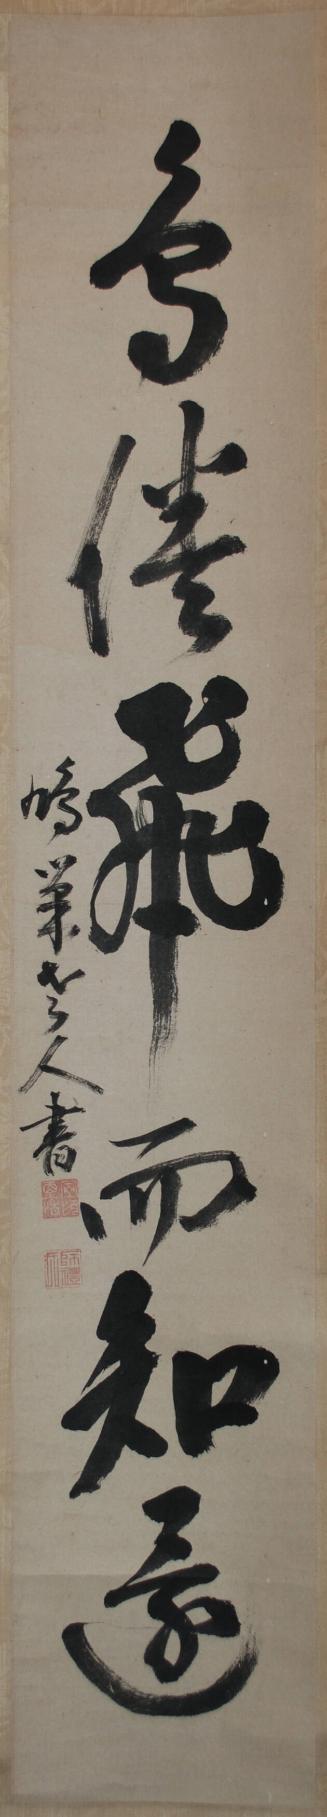 Lines from a Poem by T'ao Yüan-ming (365-427)